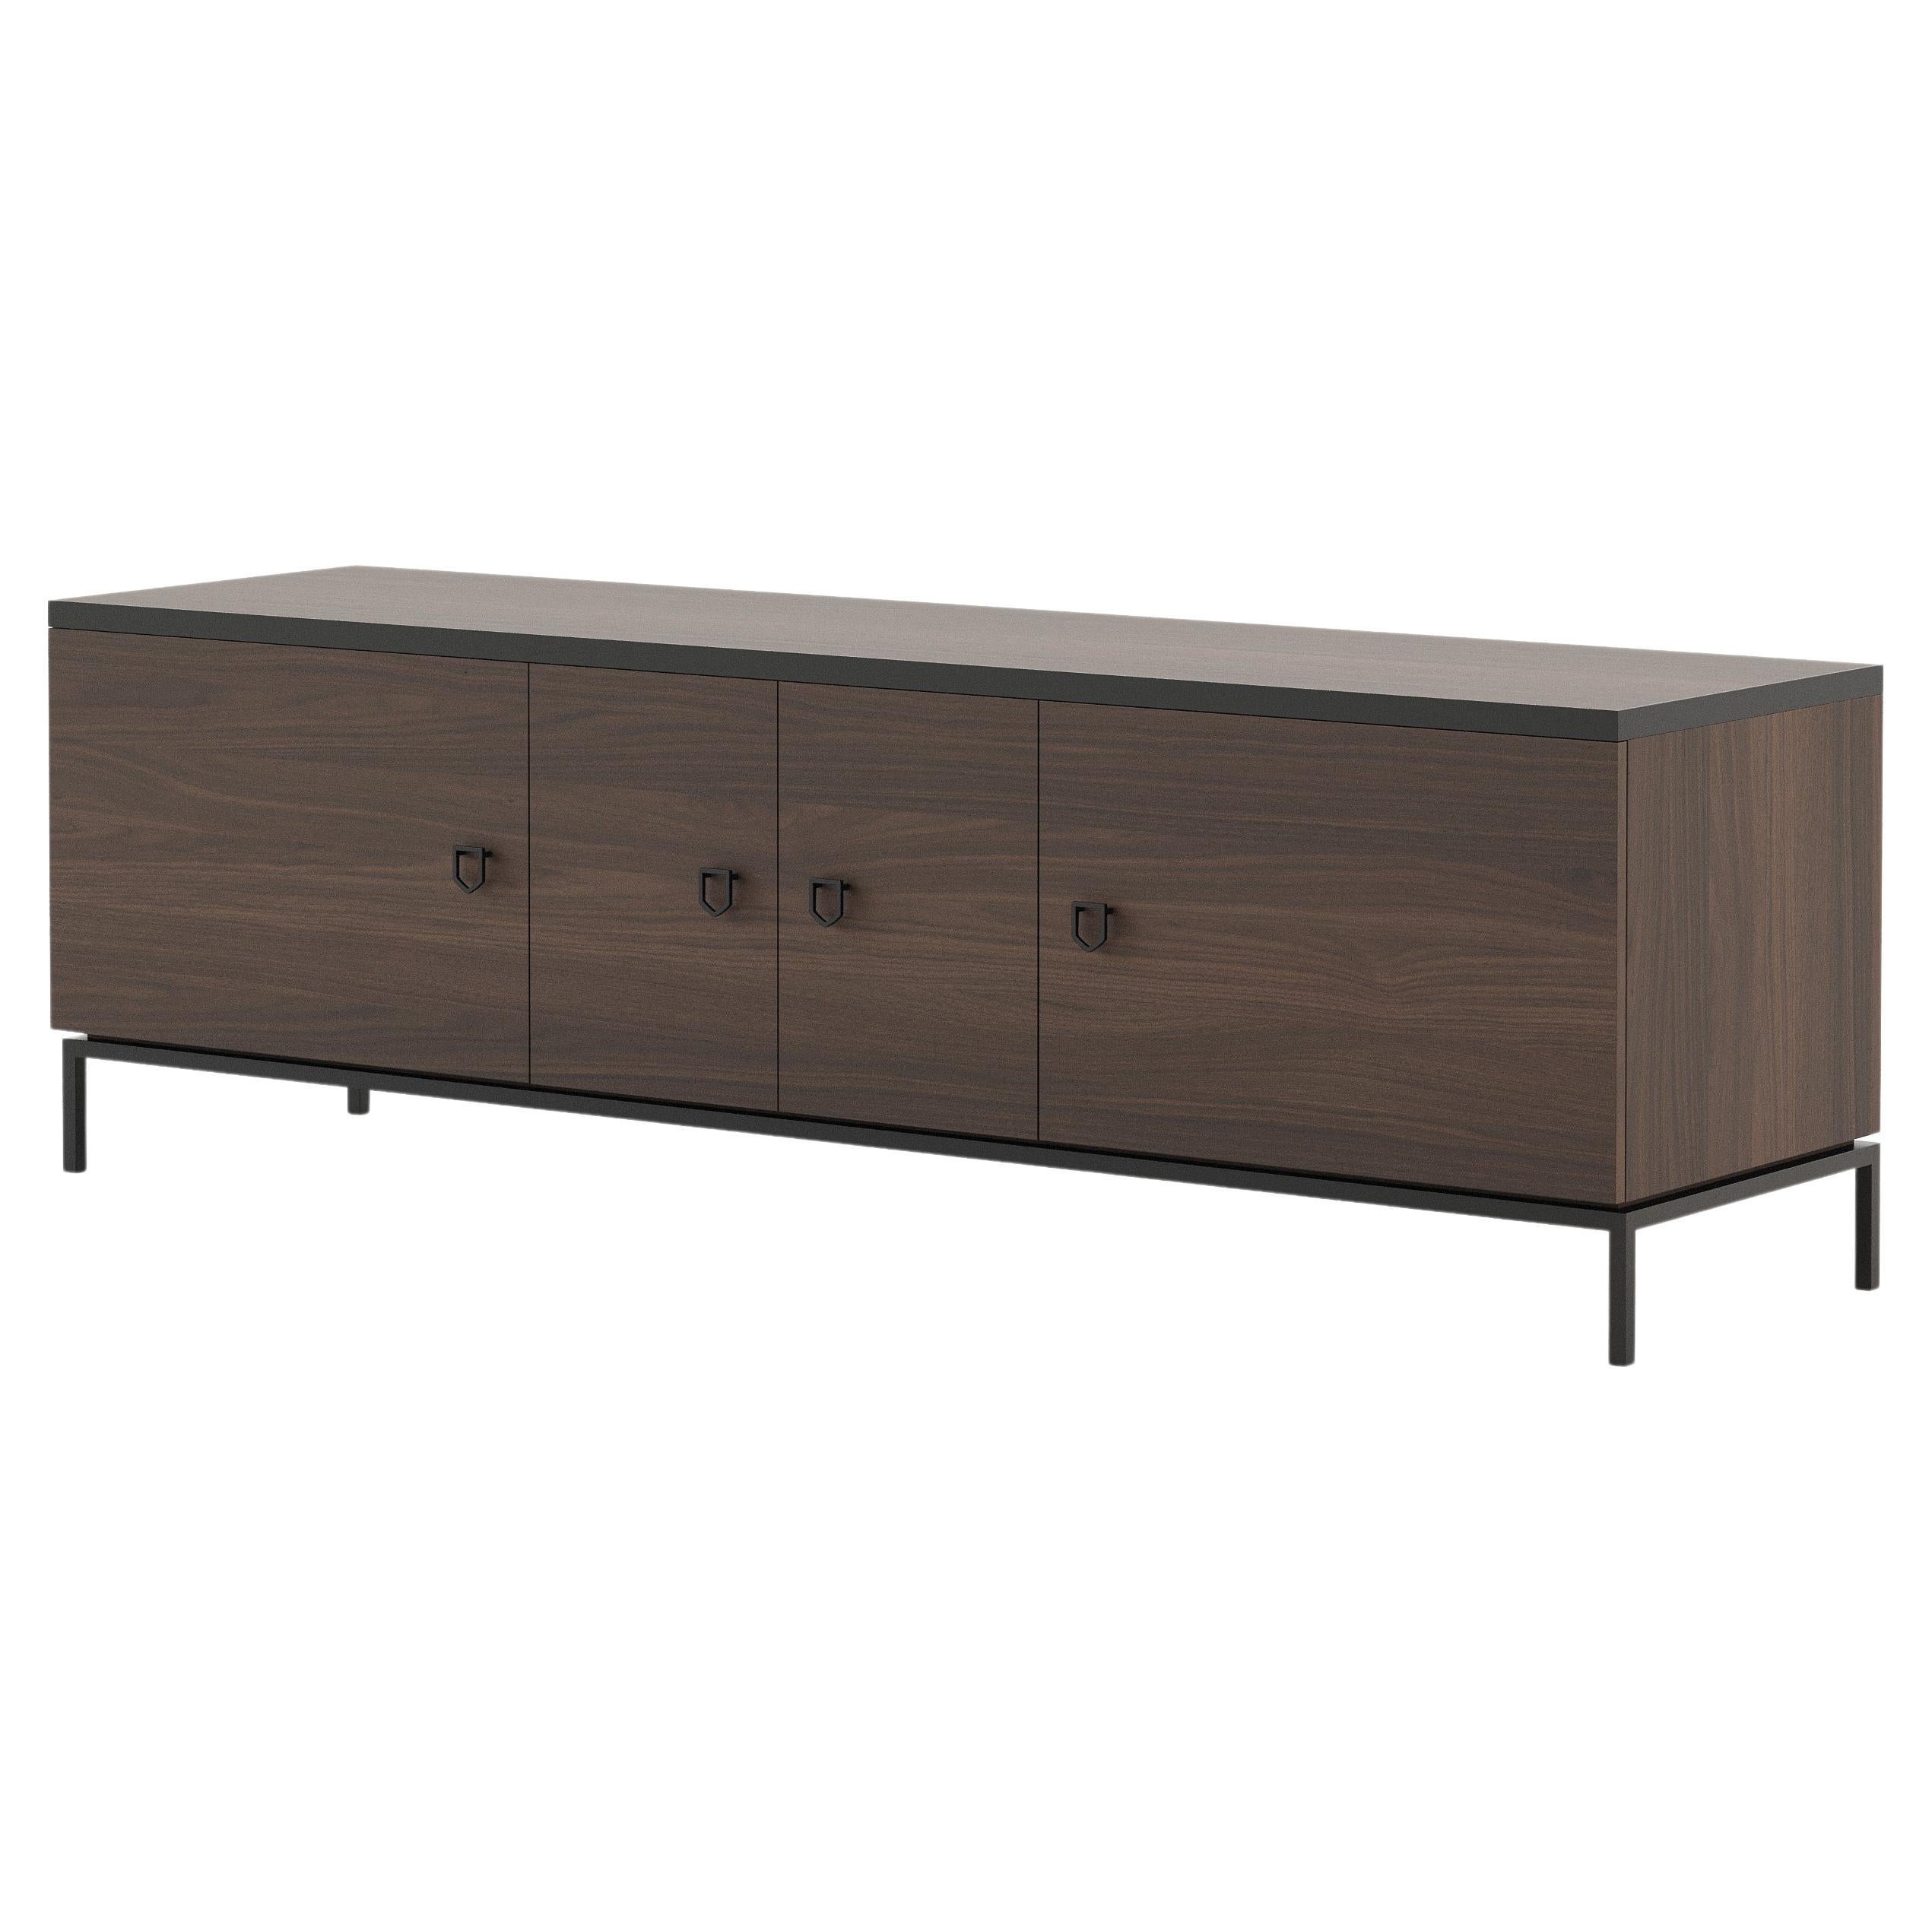 Mid-Century Modern style Cocktail TV Cabinet made with walnut and iron, Handmade For Sale